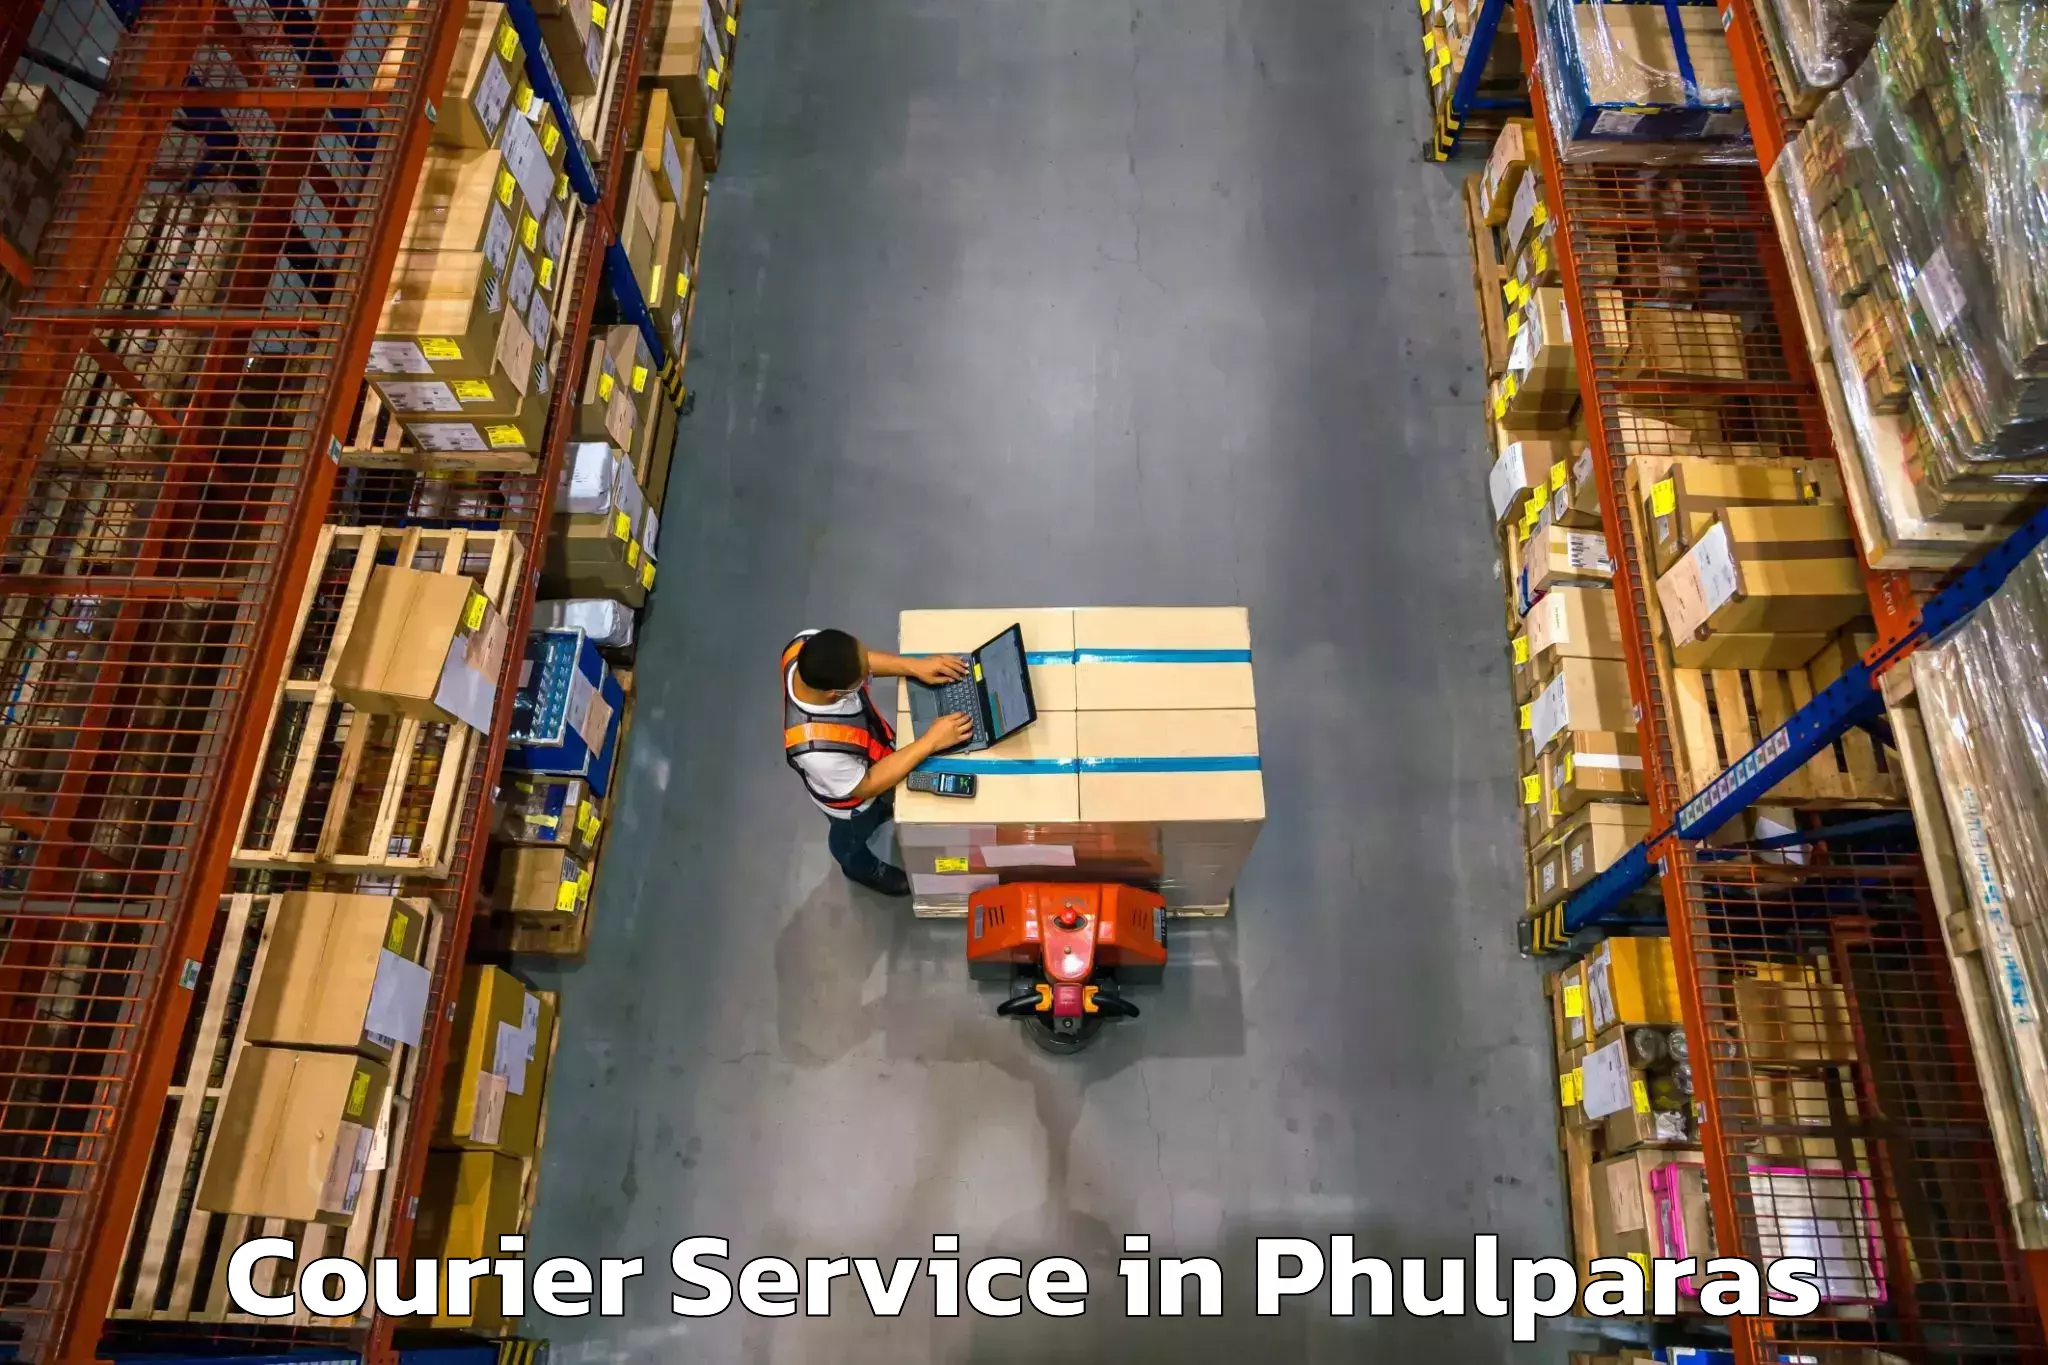 On-demand delivery in Phulparas